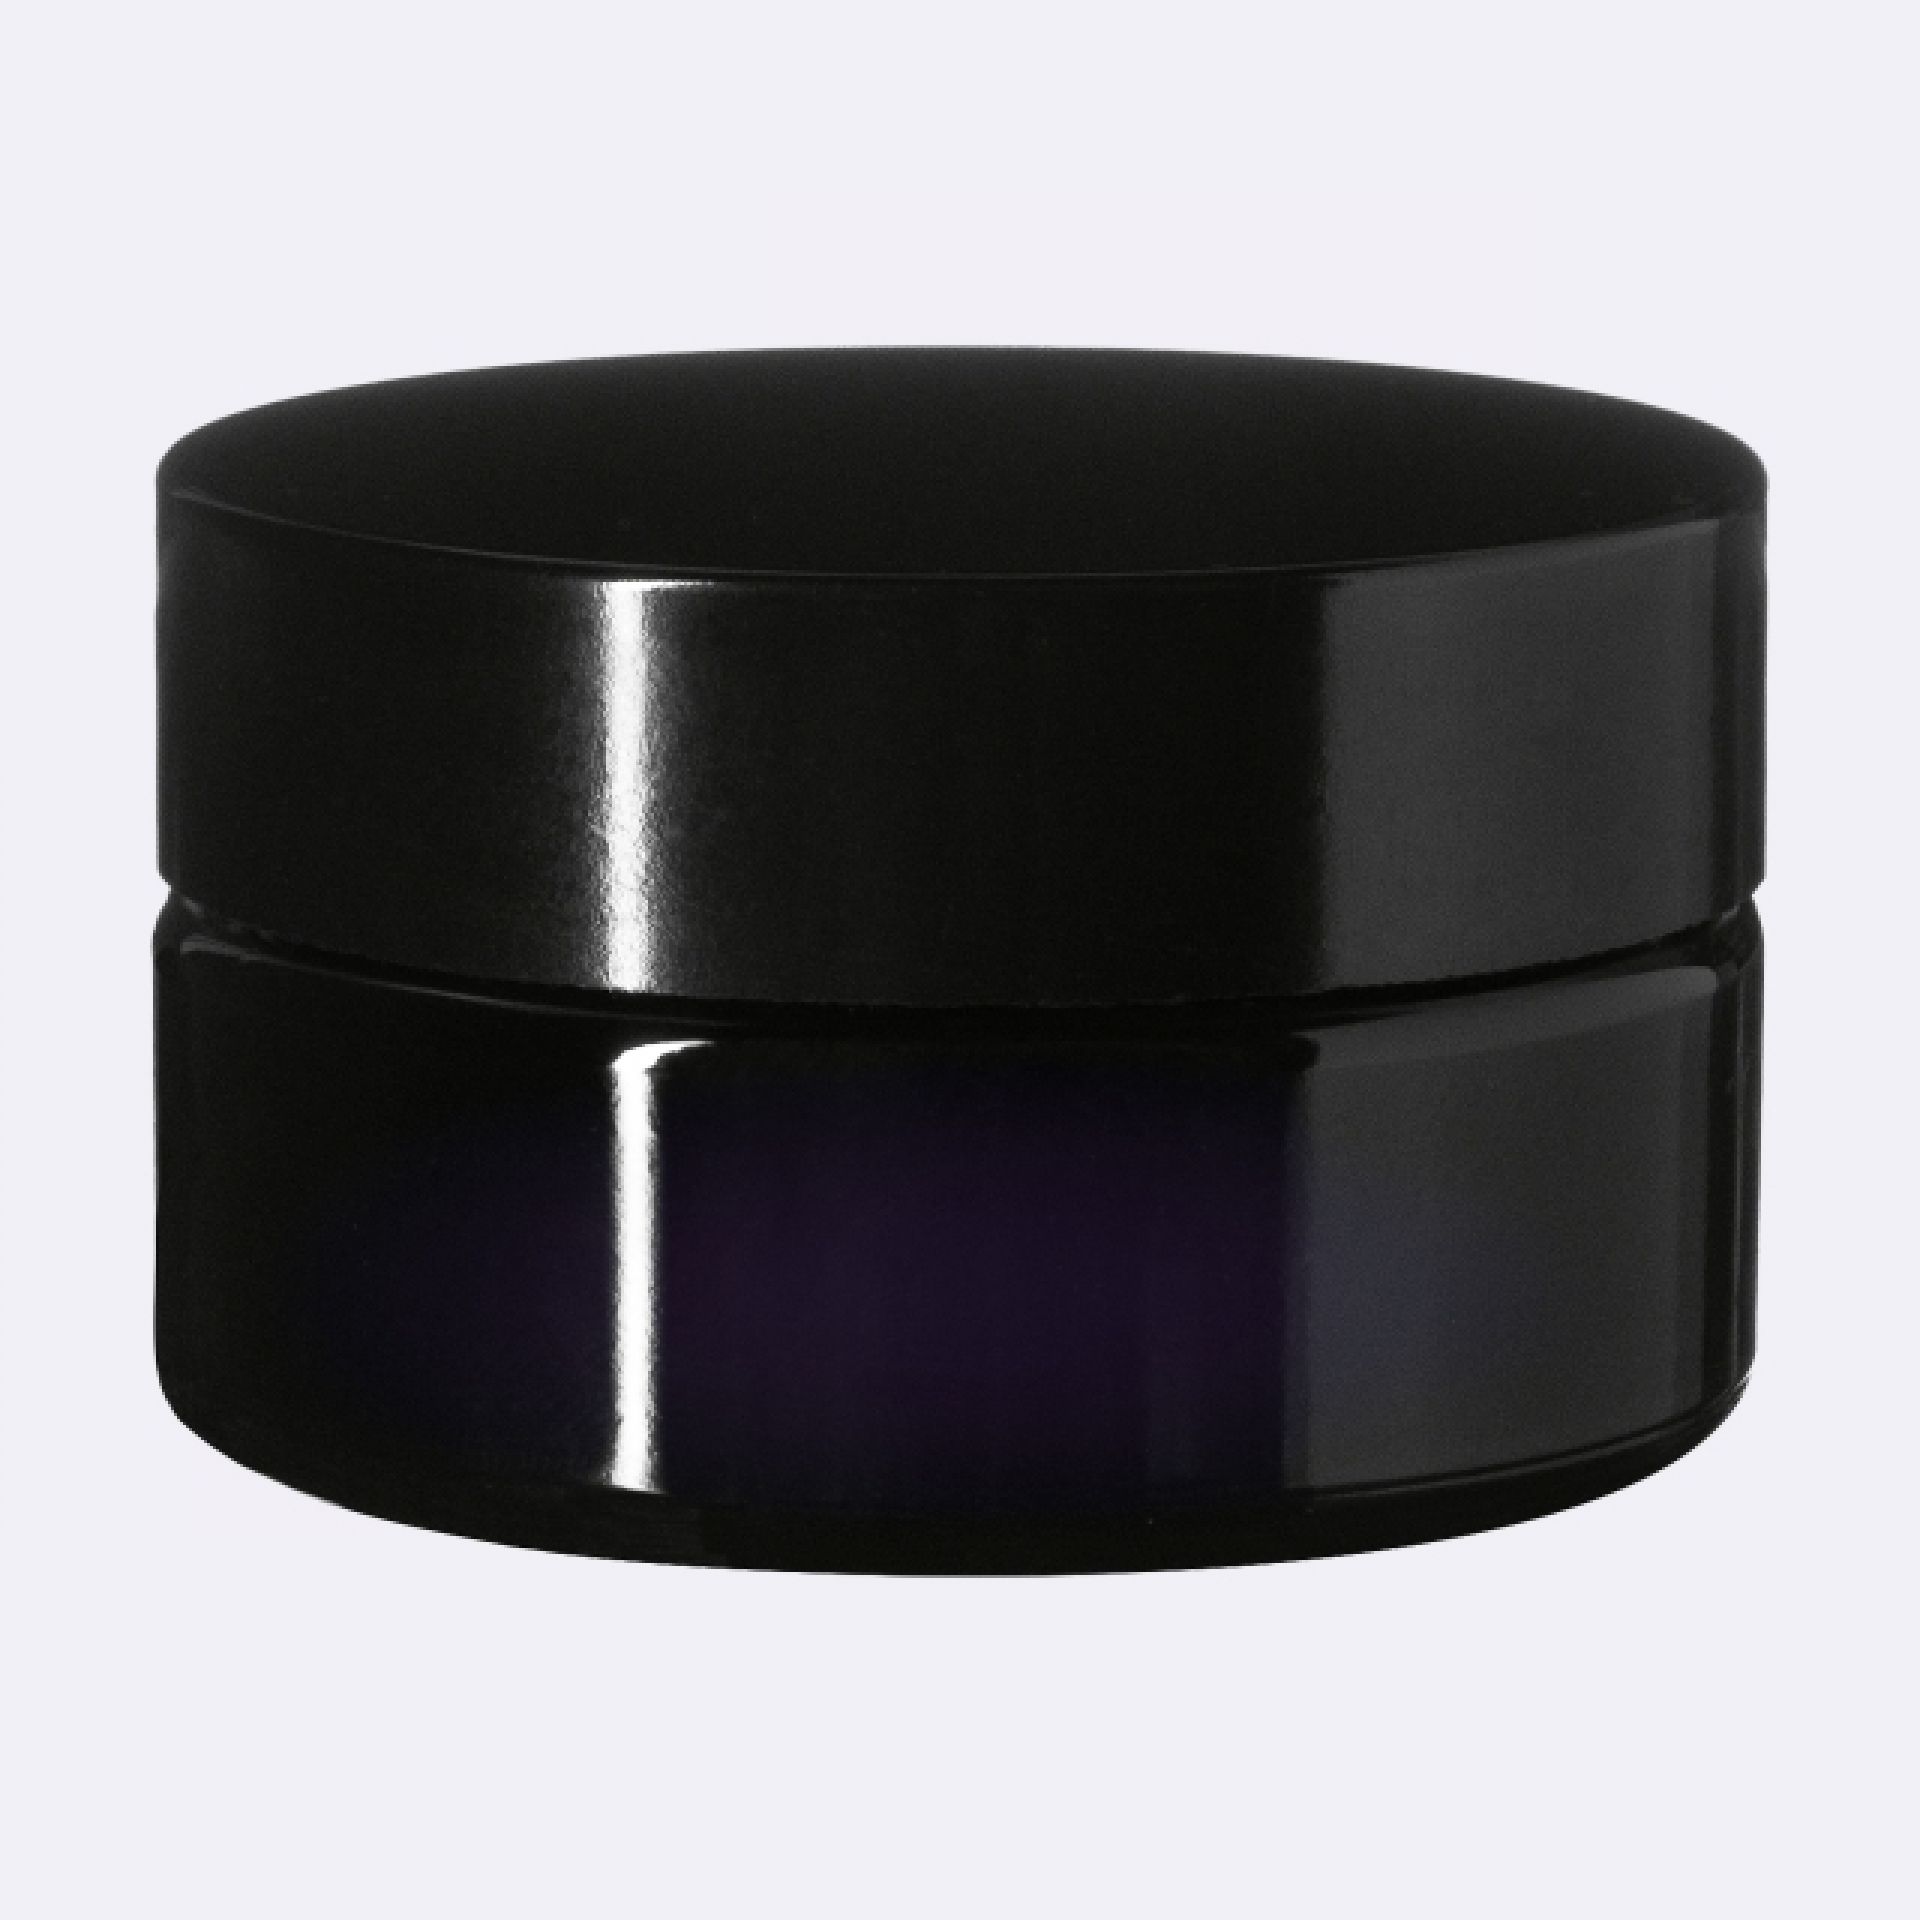 Lid Modern 57 special, PP, black, glossy finish, violet Phan inlay (Sirius 50)